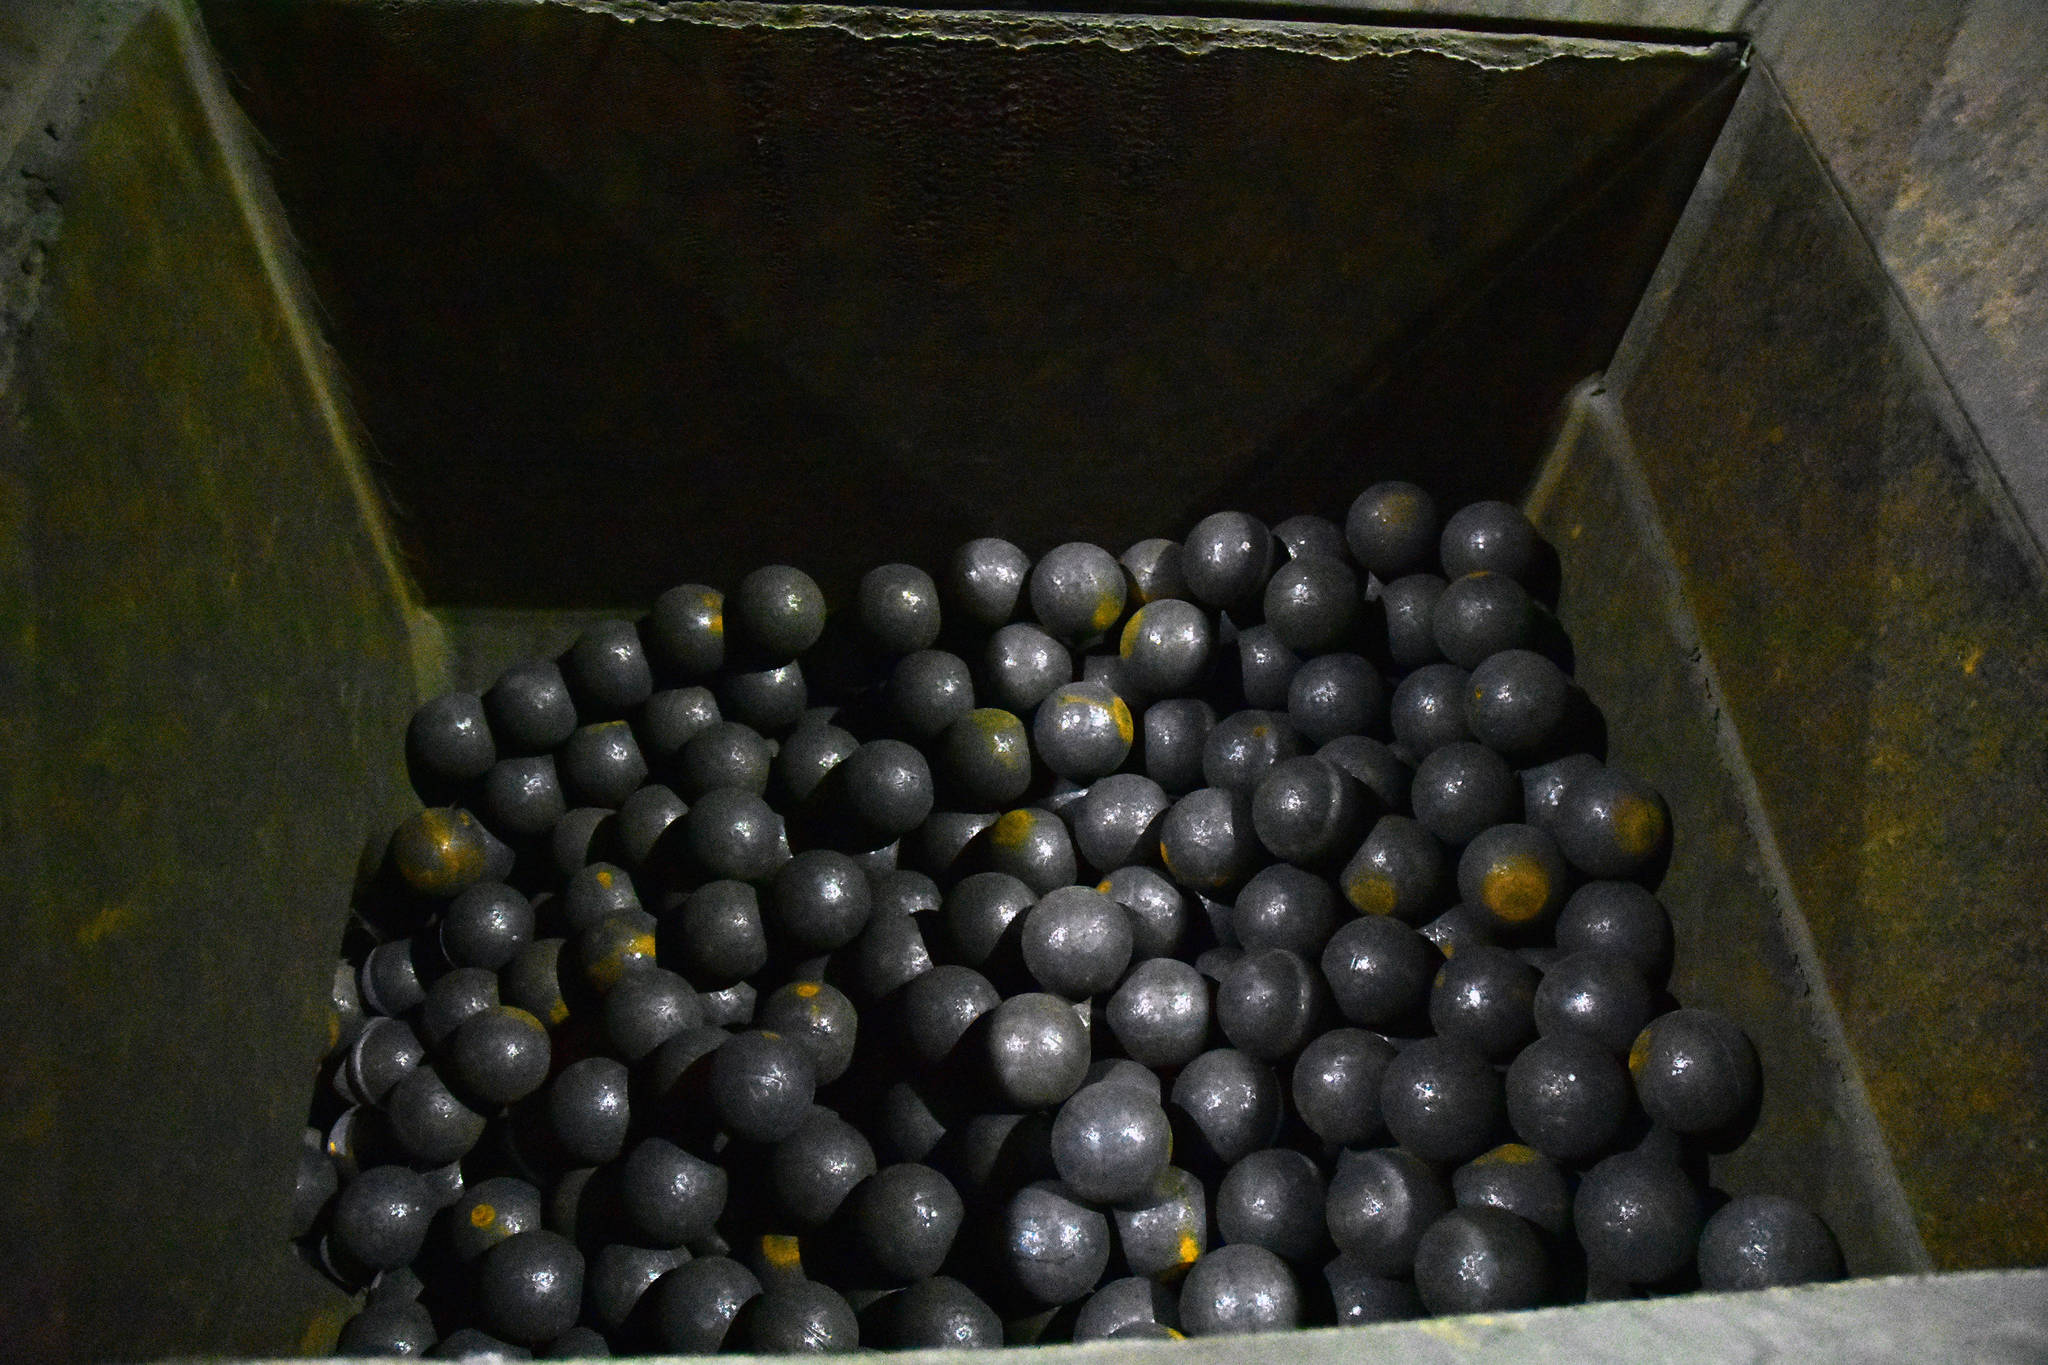 Steel mill balls waiting to be loaded into a massive tumbler where they’re used to crush rock from the mine, Monday, Oct. 14, 2019. (Peter Segall | Juneau Empire)